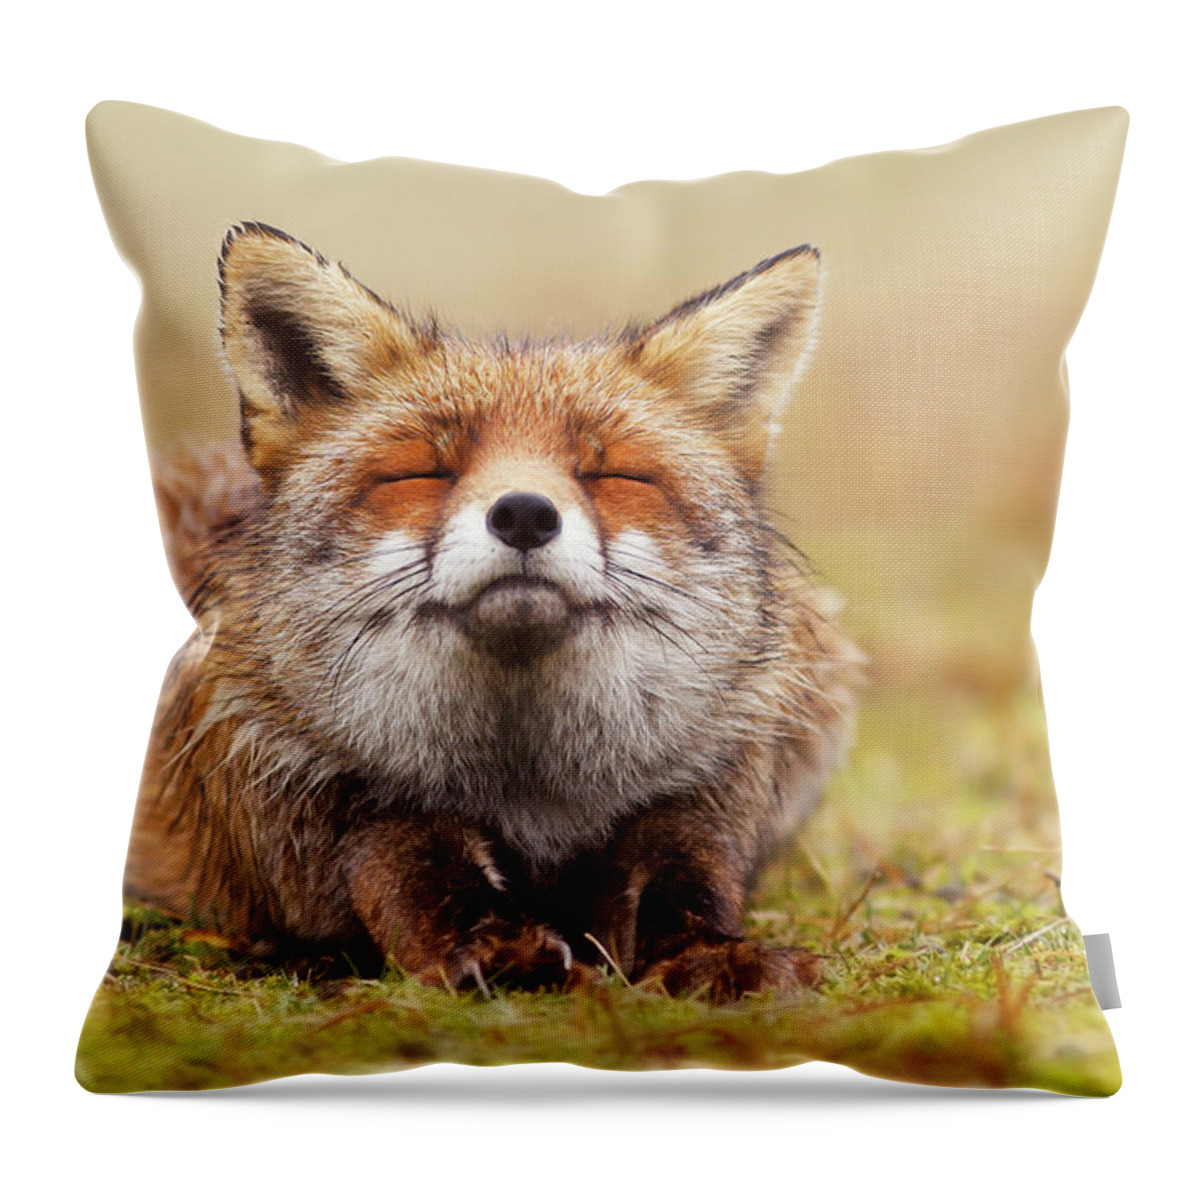 Fox Throw Pillow featuring the photograph The Smiling Fox by Roeselien Raimond